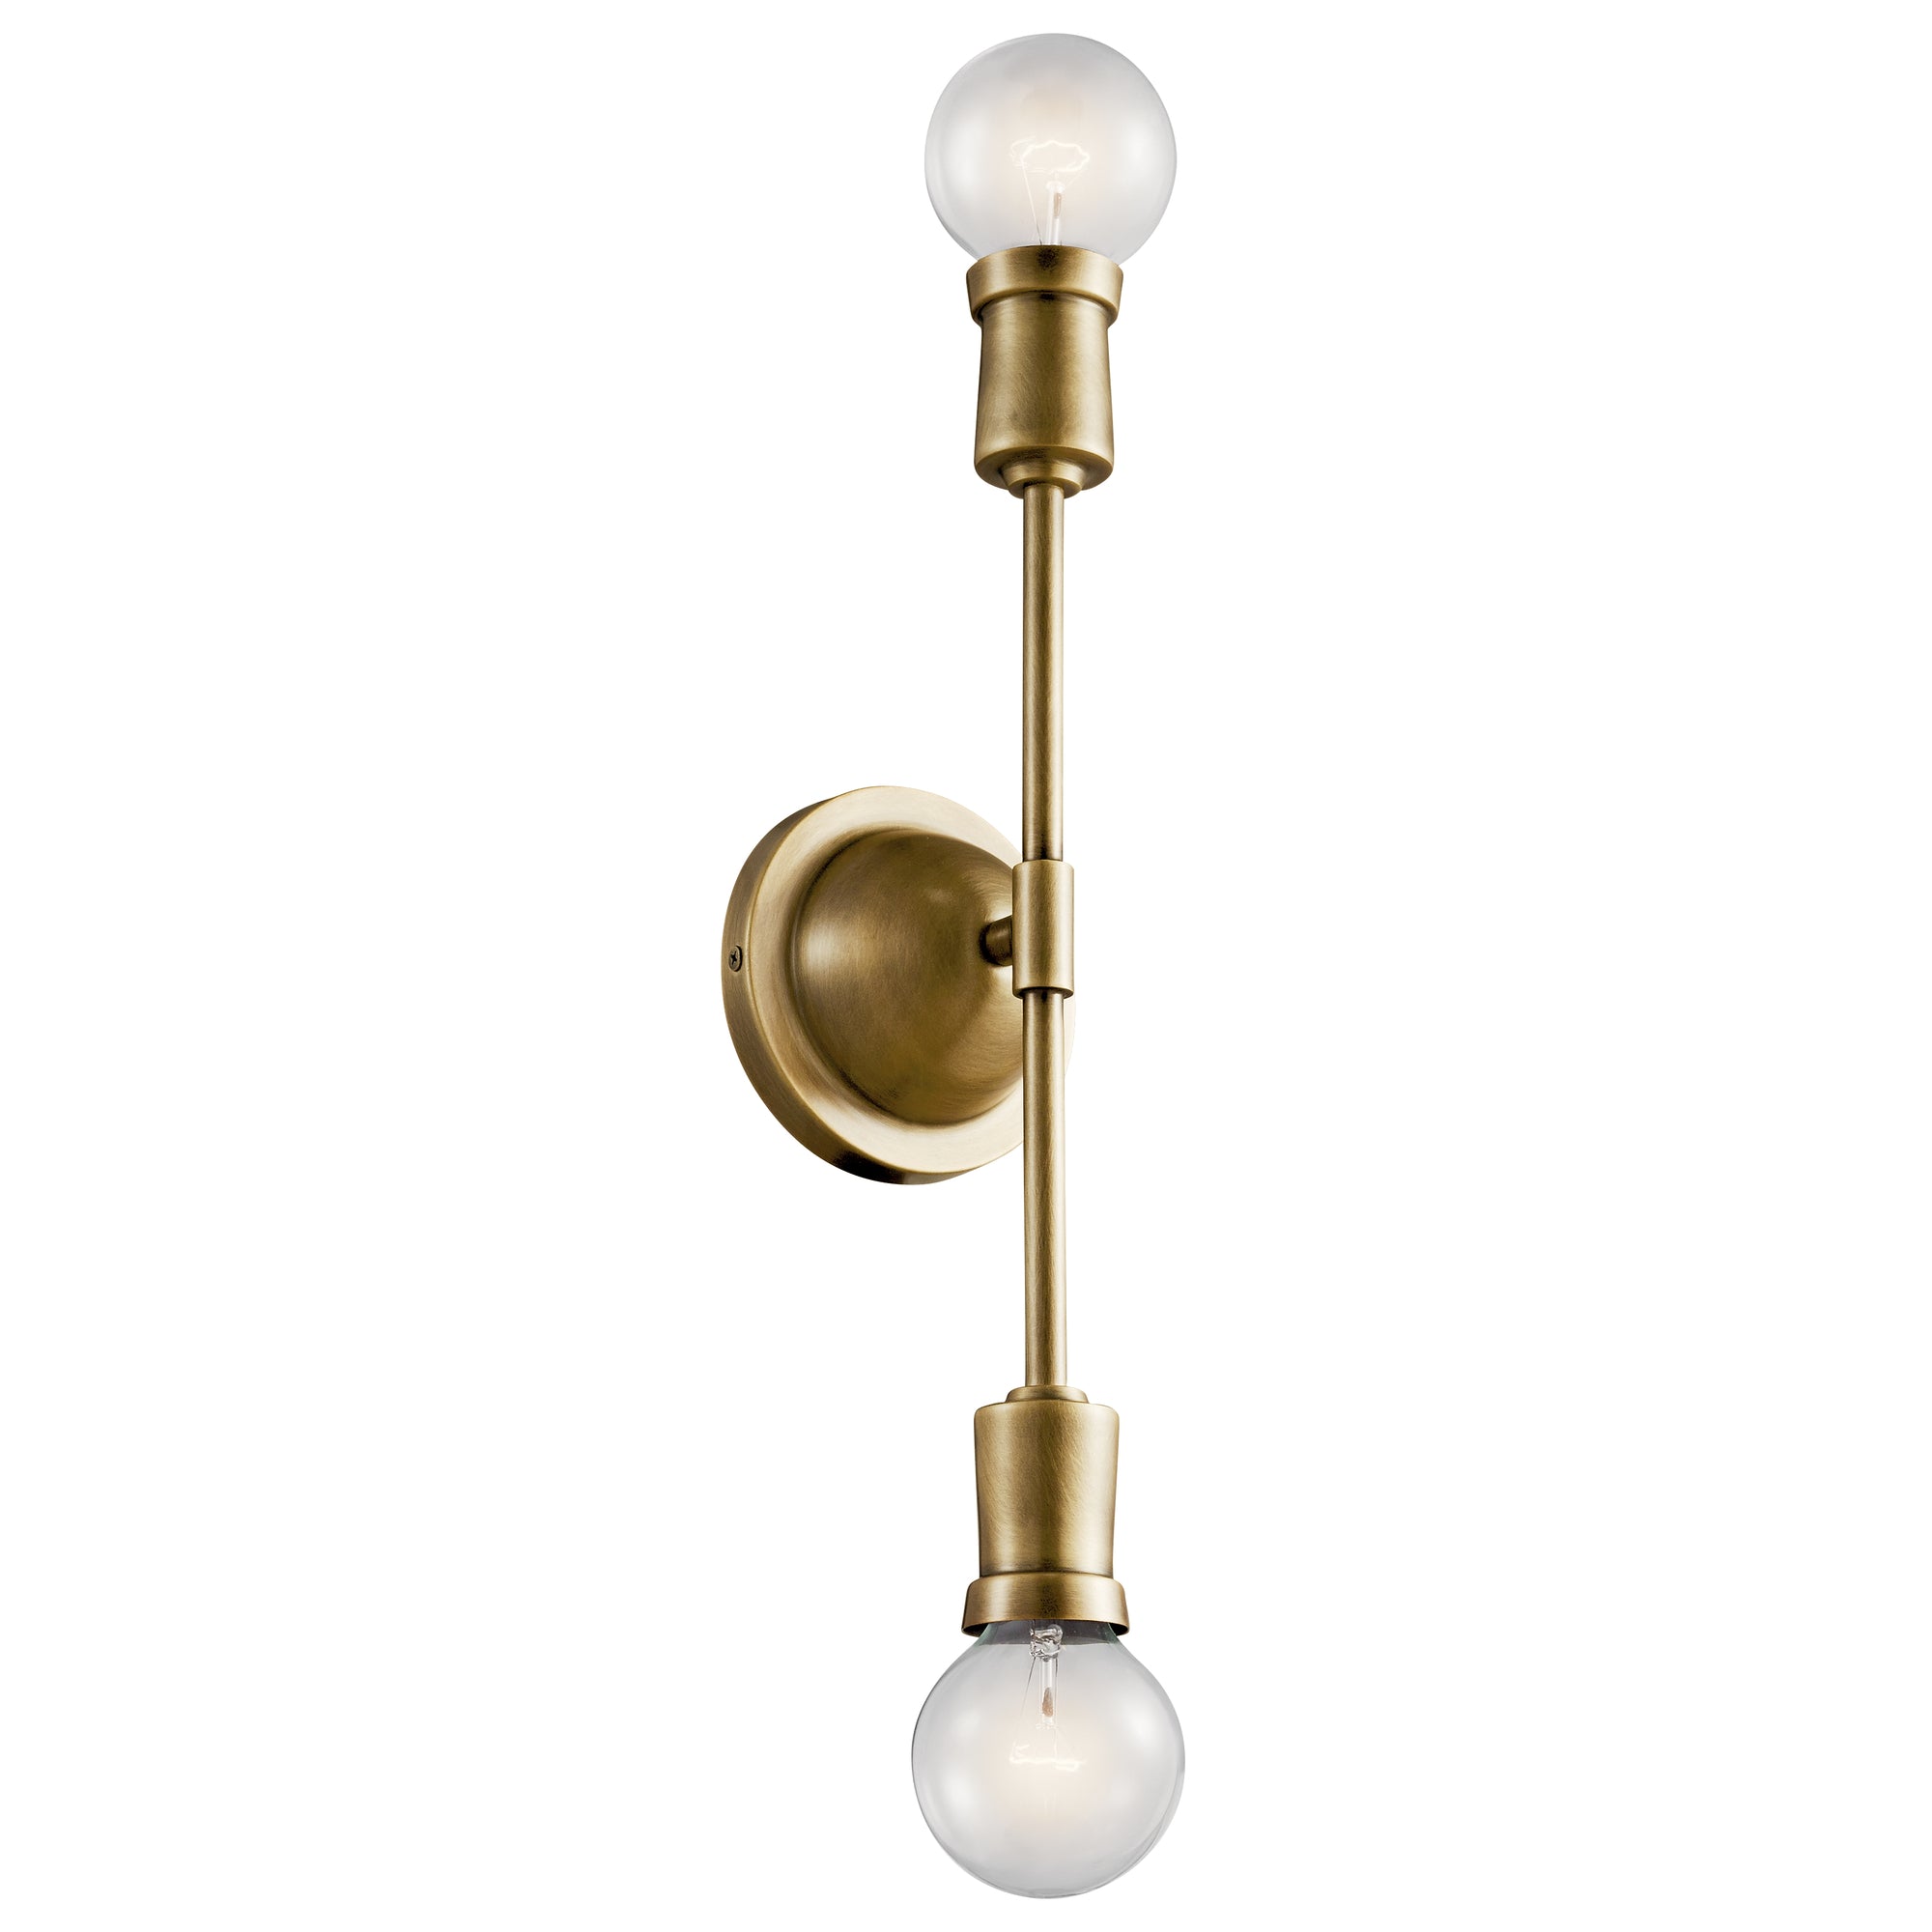 ARMSTRONG Sconce Gold - 43195NBR | KICHLER